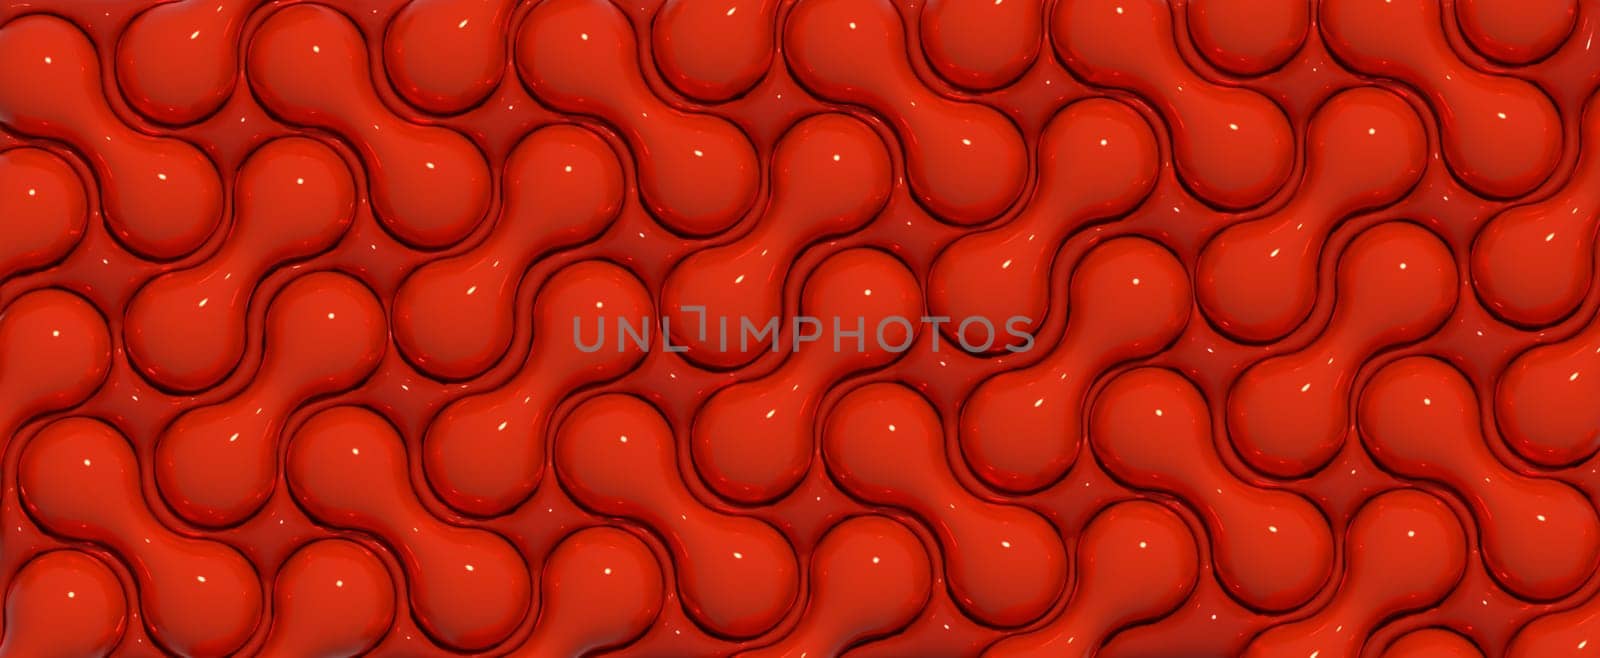 Abstract red background with various inflated figures, 3D rendering illustration by ndanko